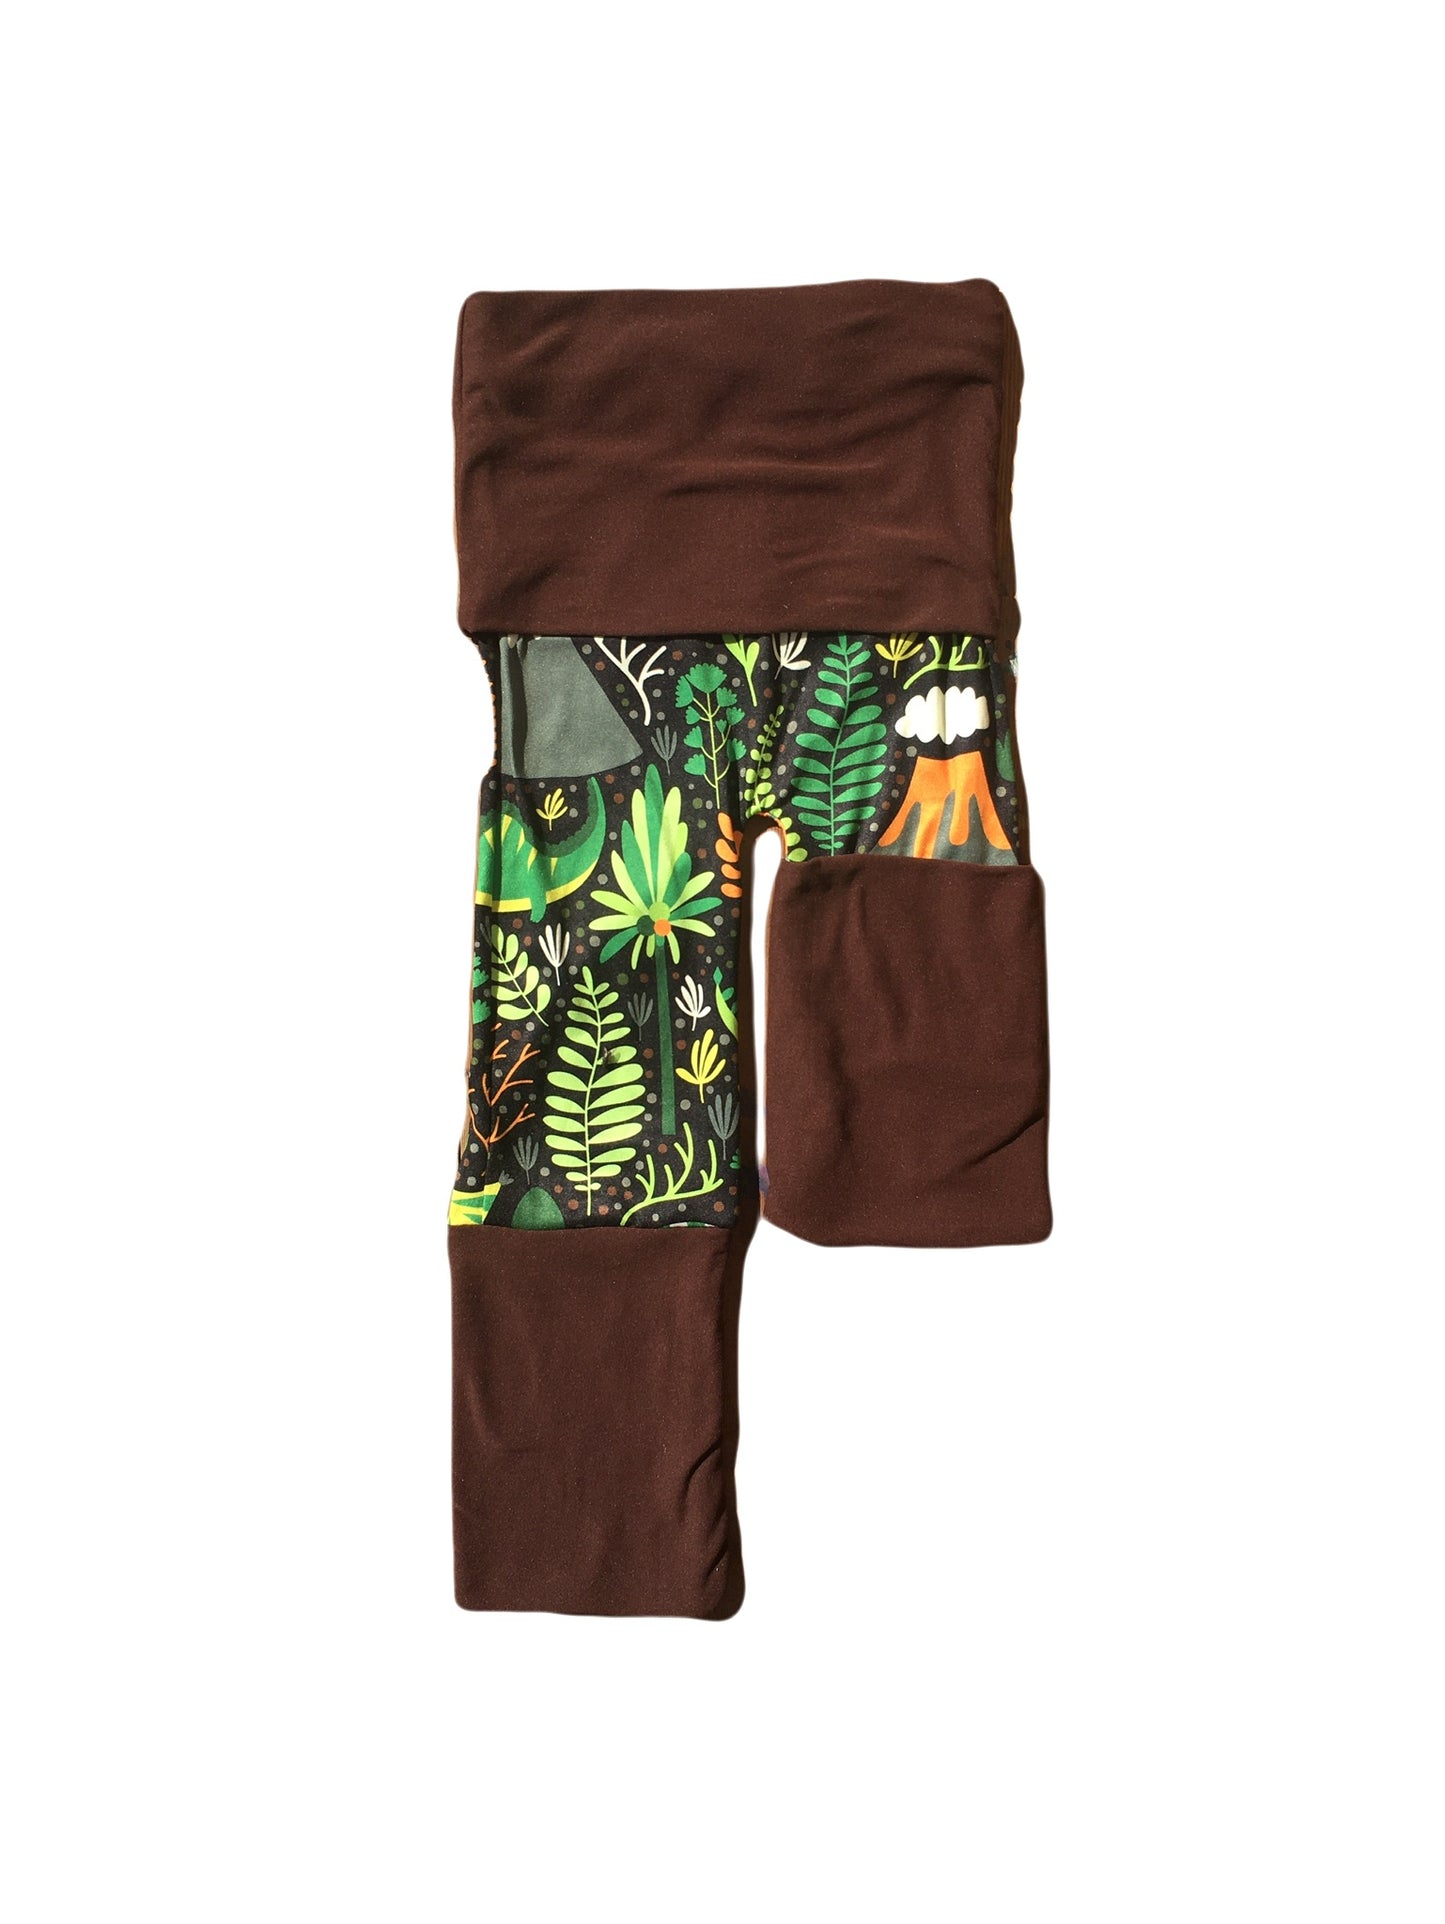 Adjustable Pants - Dinosaurs with Brown